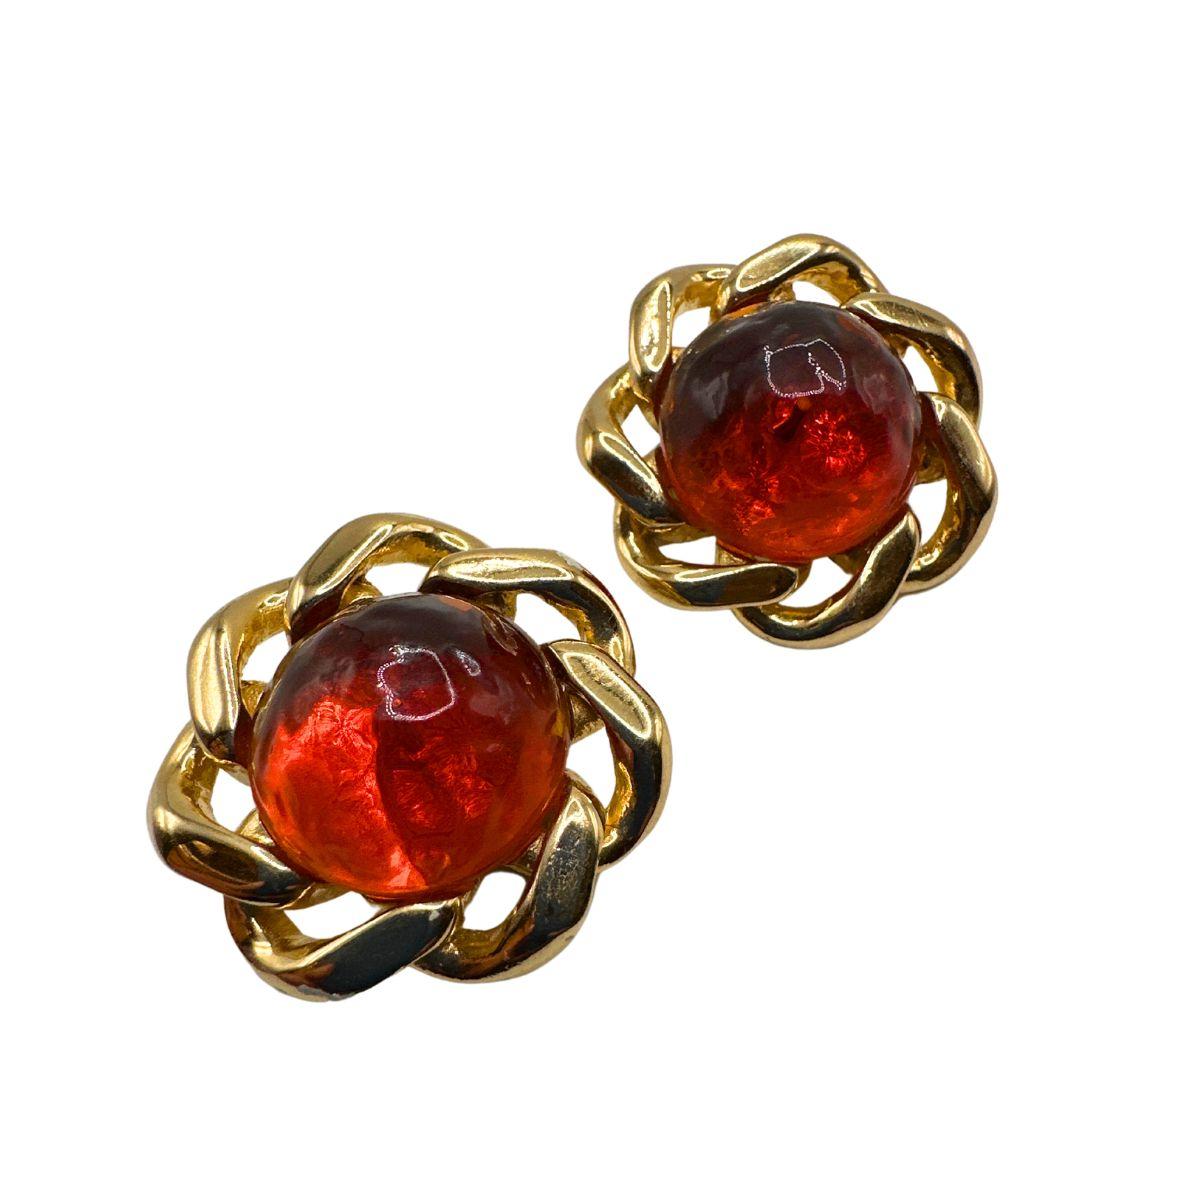 Earring Diameter: 1.32″

Bin Code: E19 / P2

Step into the past with these Antique Vintage Ciner Clip-On Orange Glass Earrings. Crafted with intricate detailing, these earrings exude timeless elegance and capture the essence of vintage charm.

The